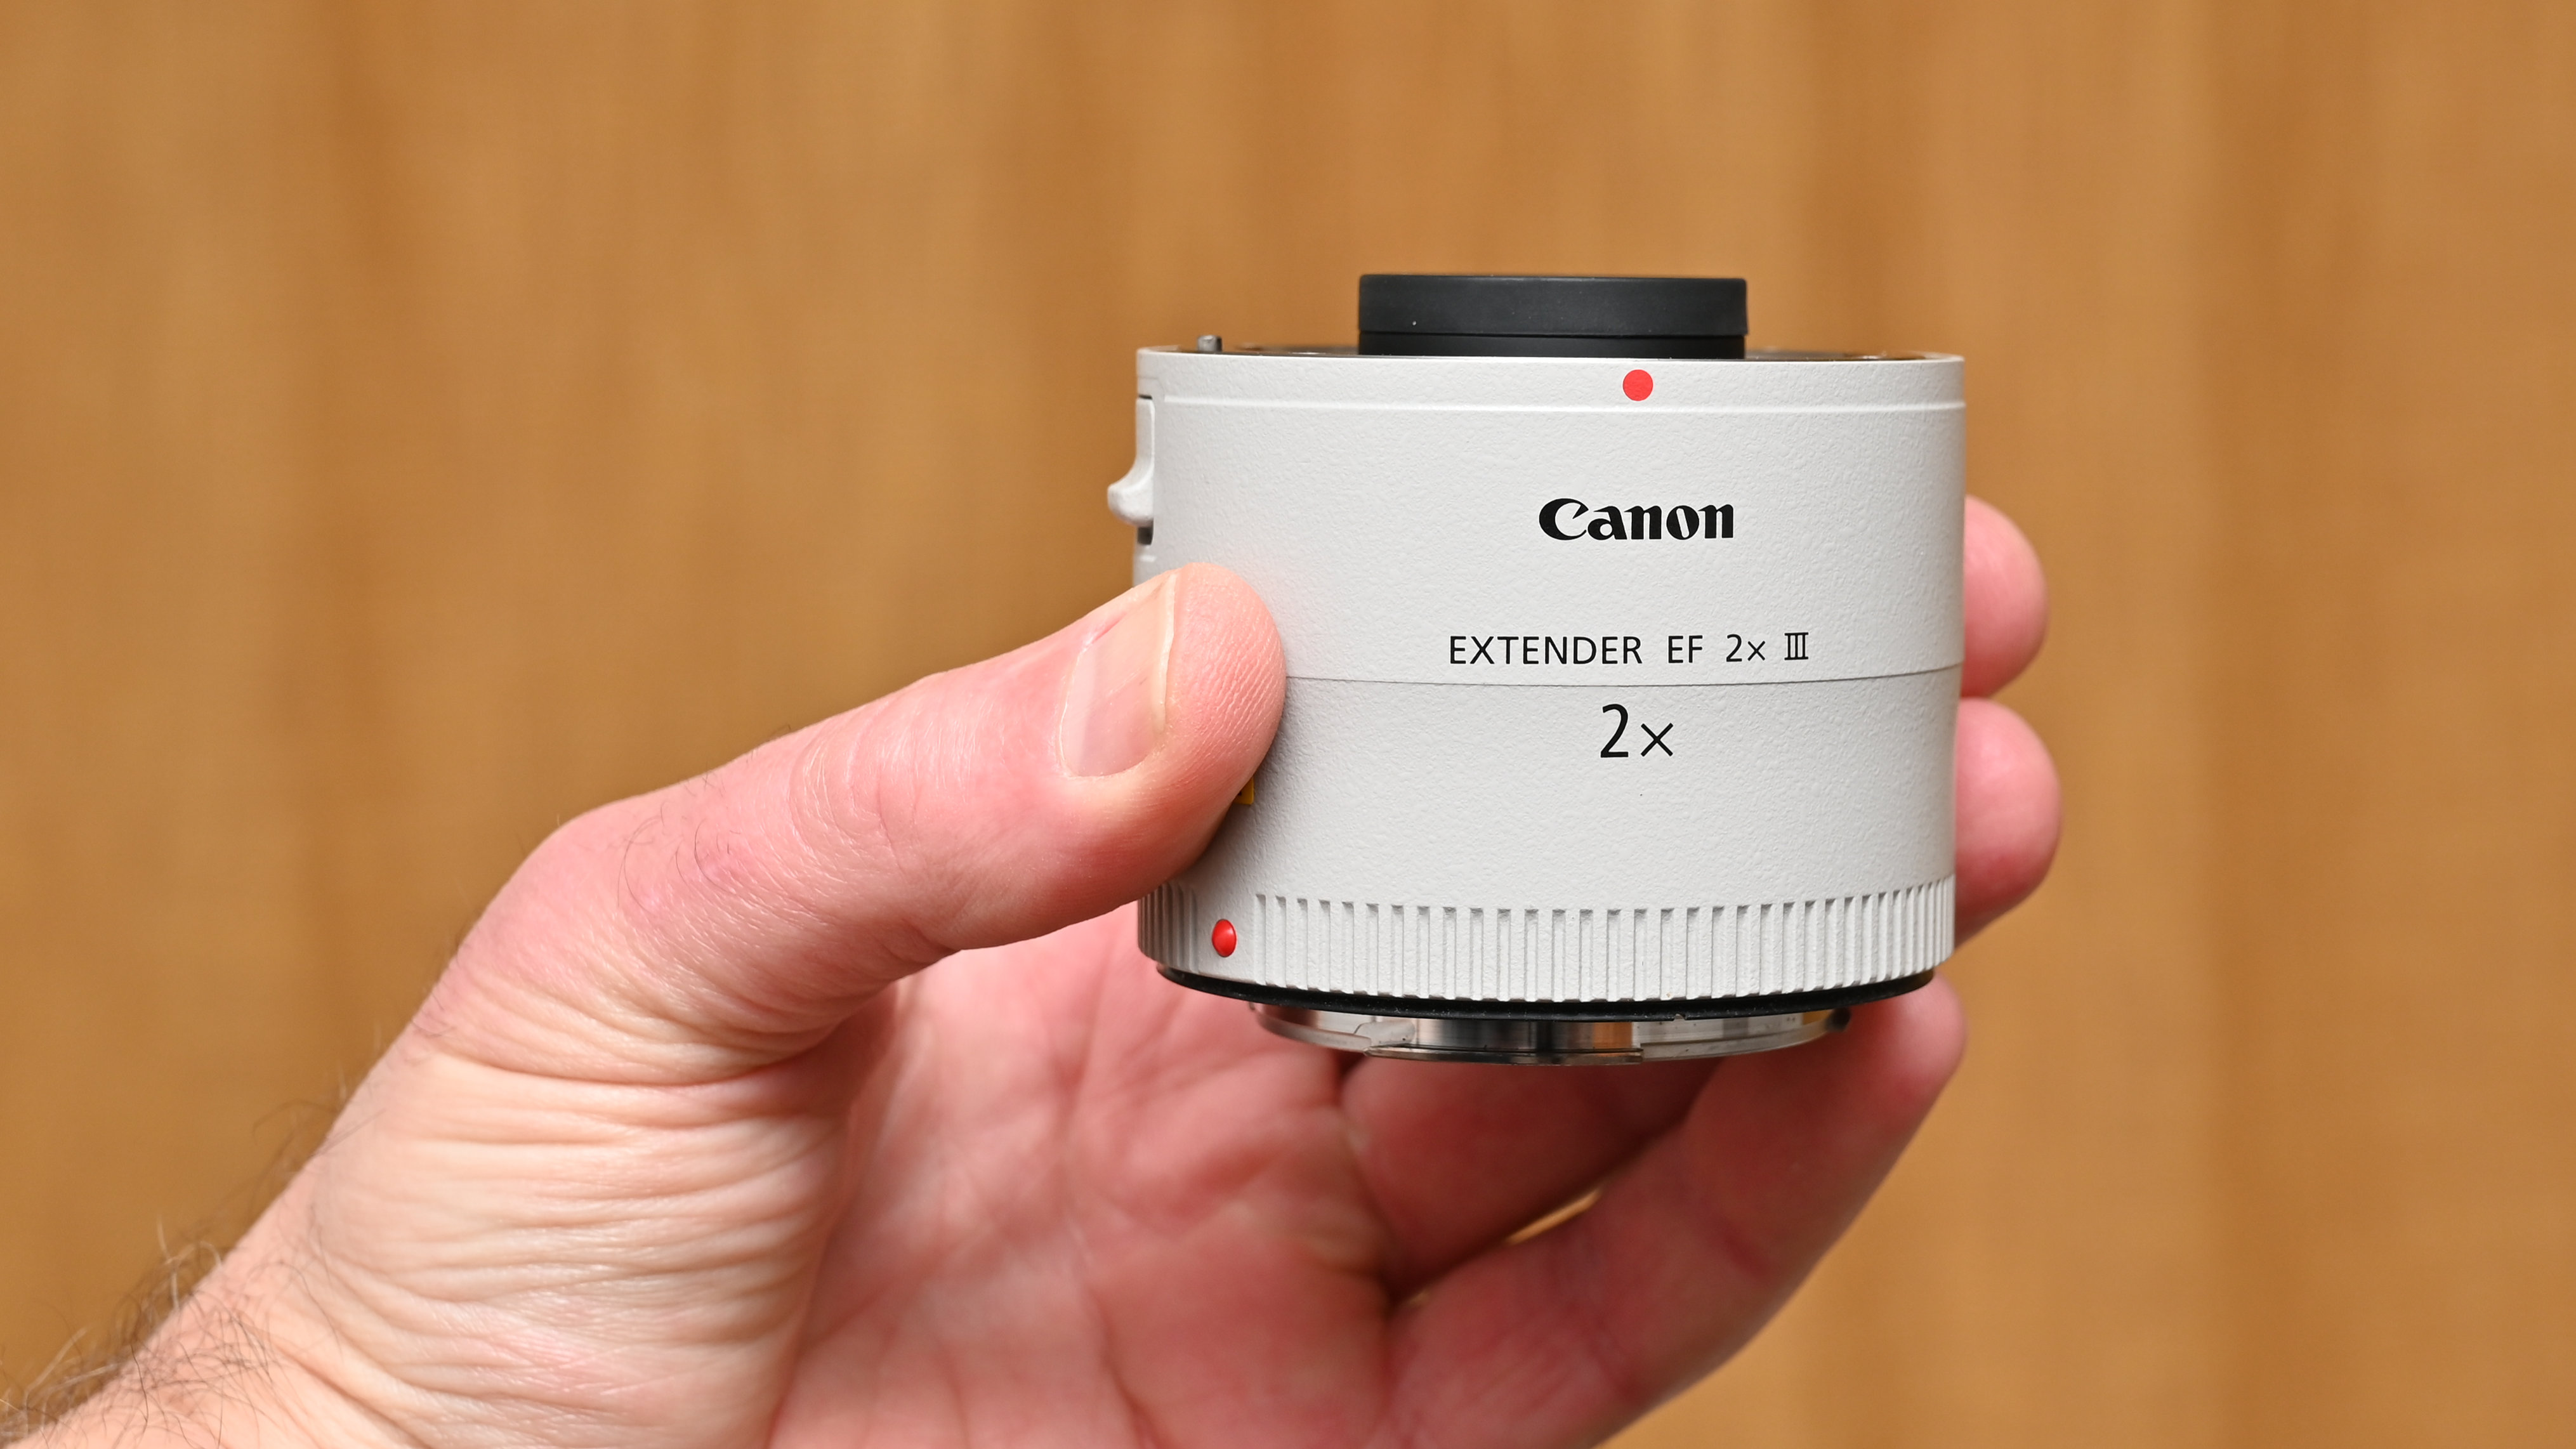 Canon Extender EF 2x III review: is twice as much twice as good